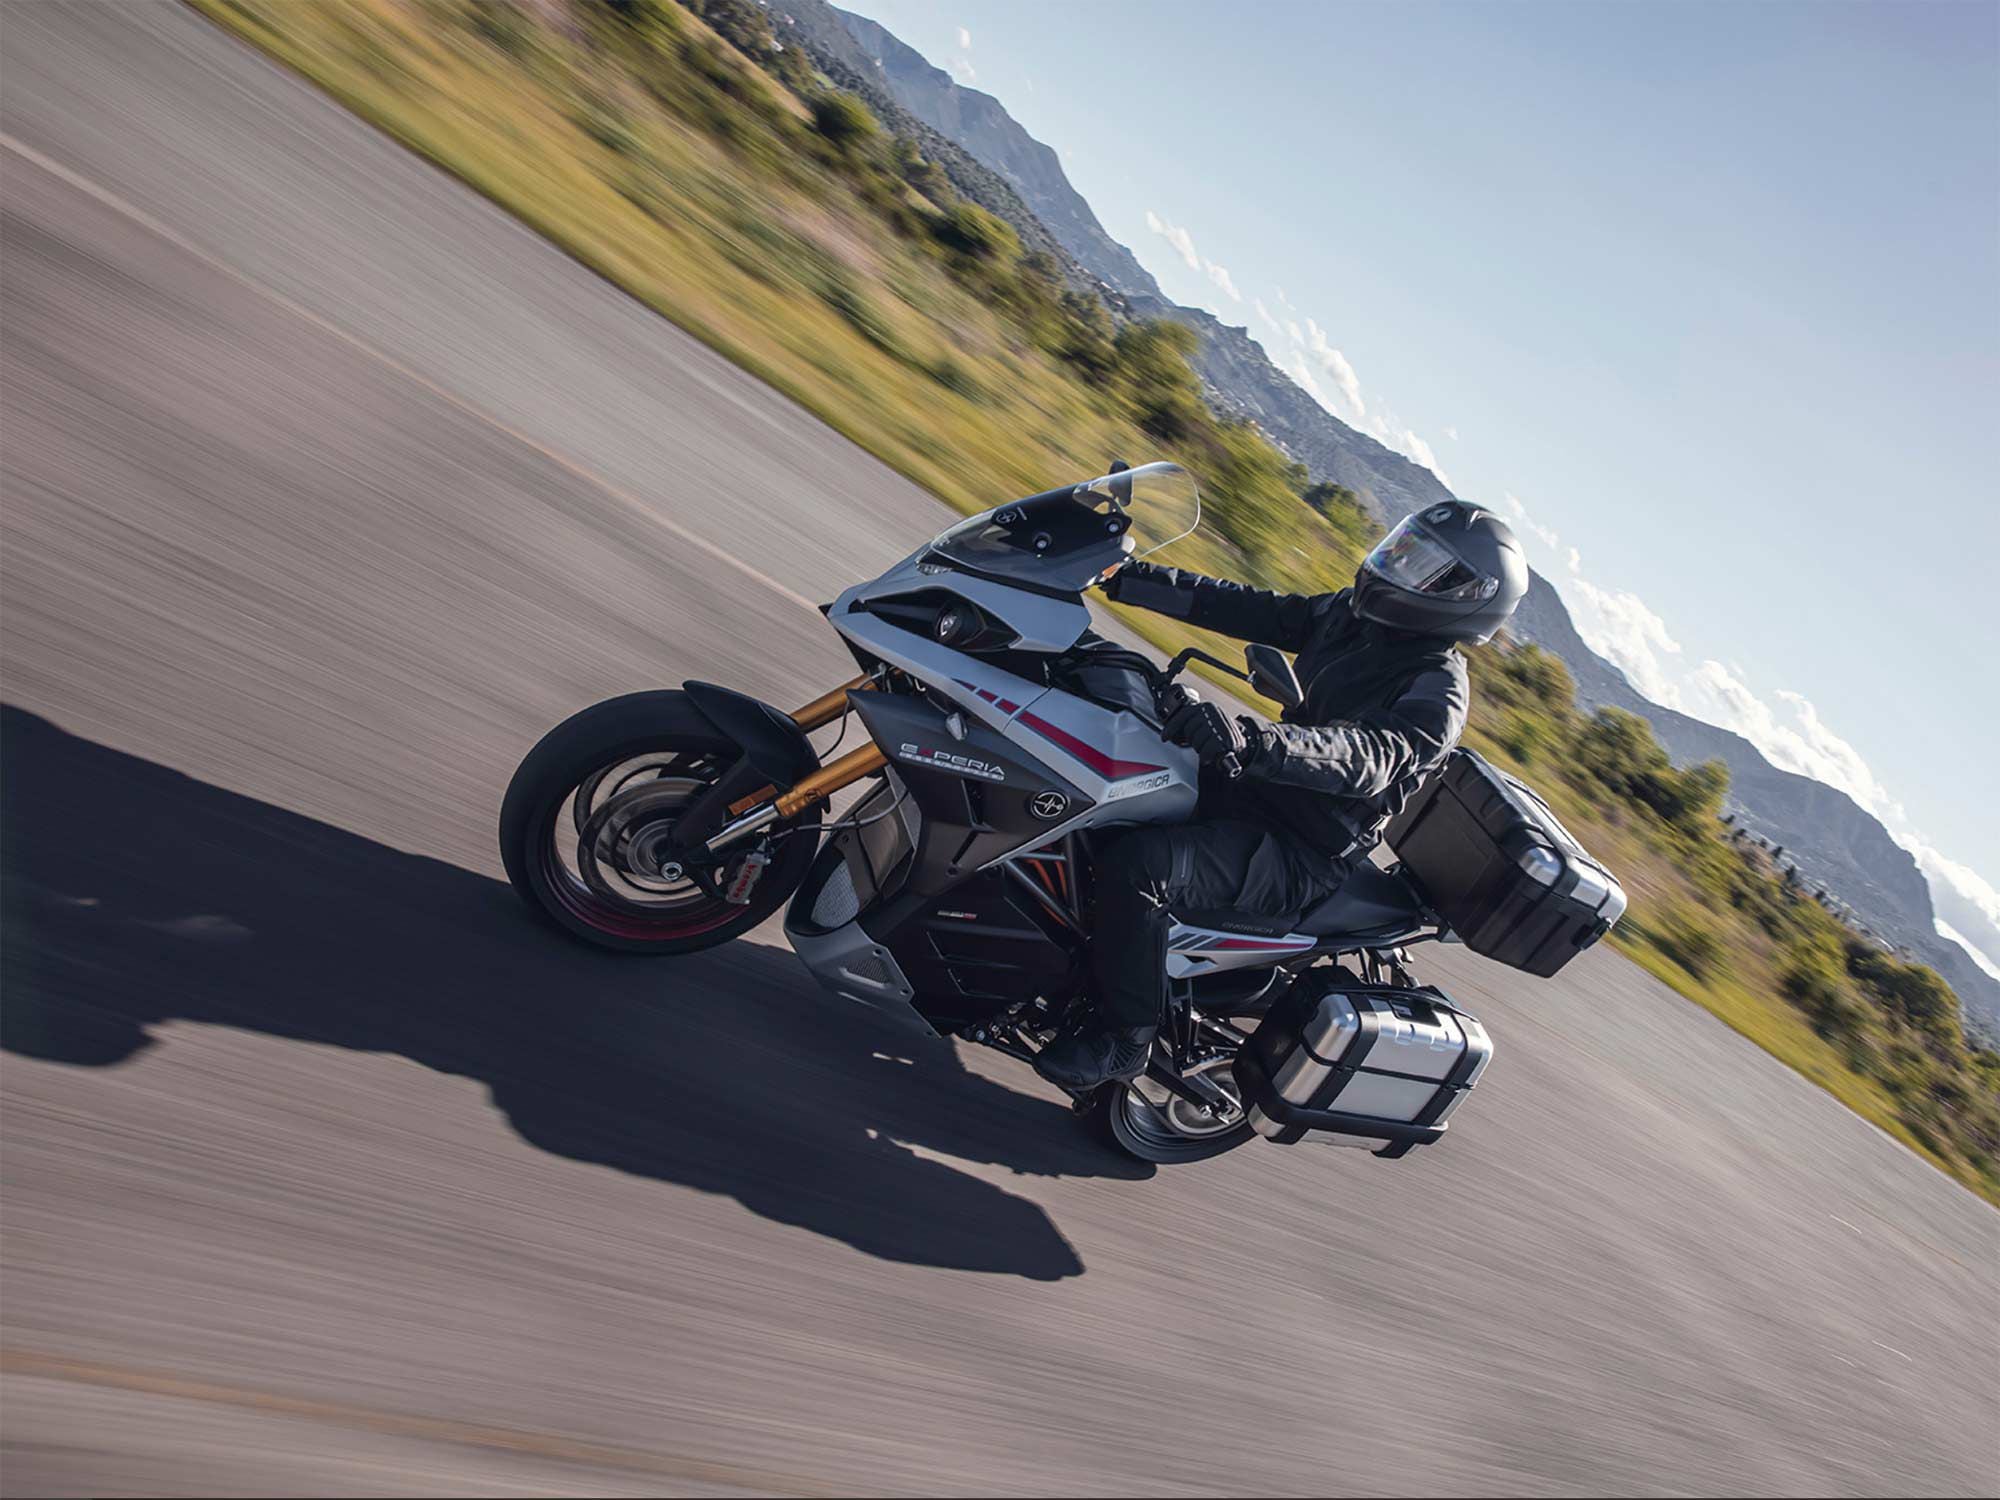 The 112 liters of storage combined with straight-forward ADV styling equals a bold statement by Energica.